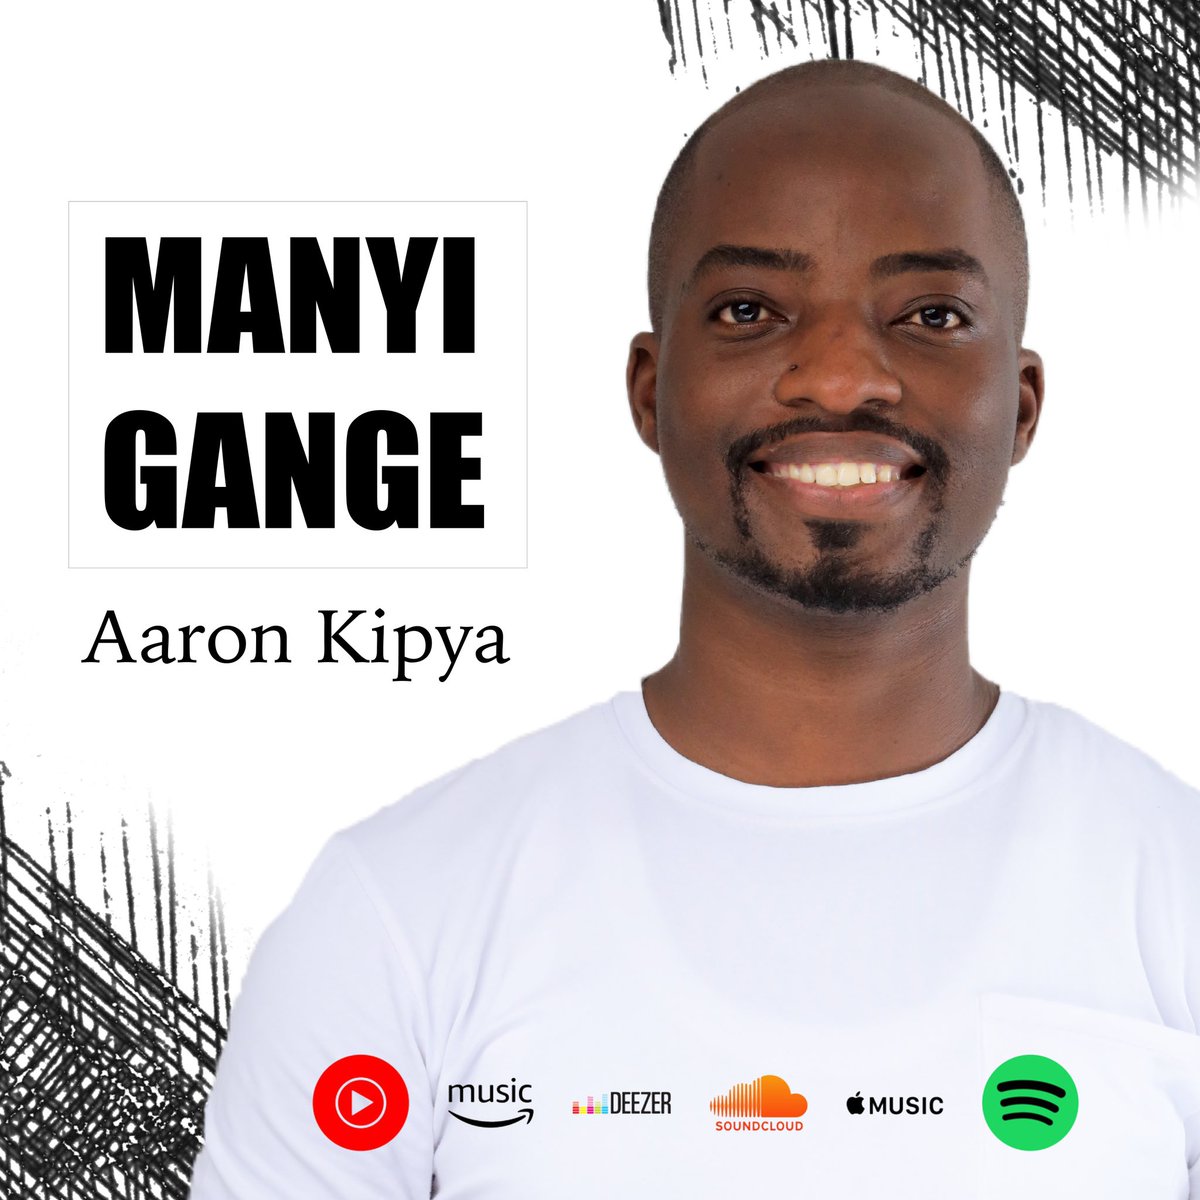 Where do you draw your strength from? Who is your strength? Well scripture says 'God is our strength and our portion forever' Ps.73:26 Here is #ManyiGange by @AaronKipya1 youtu.be/B-LVanyA8mk 👈 Worth listening in to Especially in these crazy times we're in